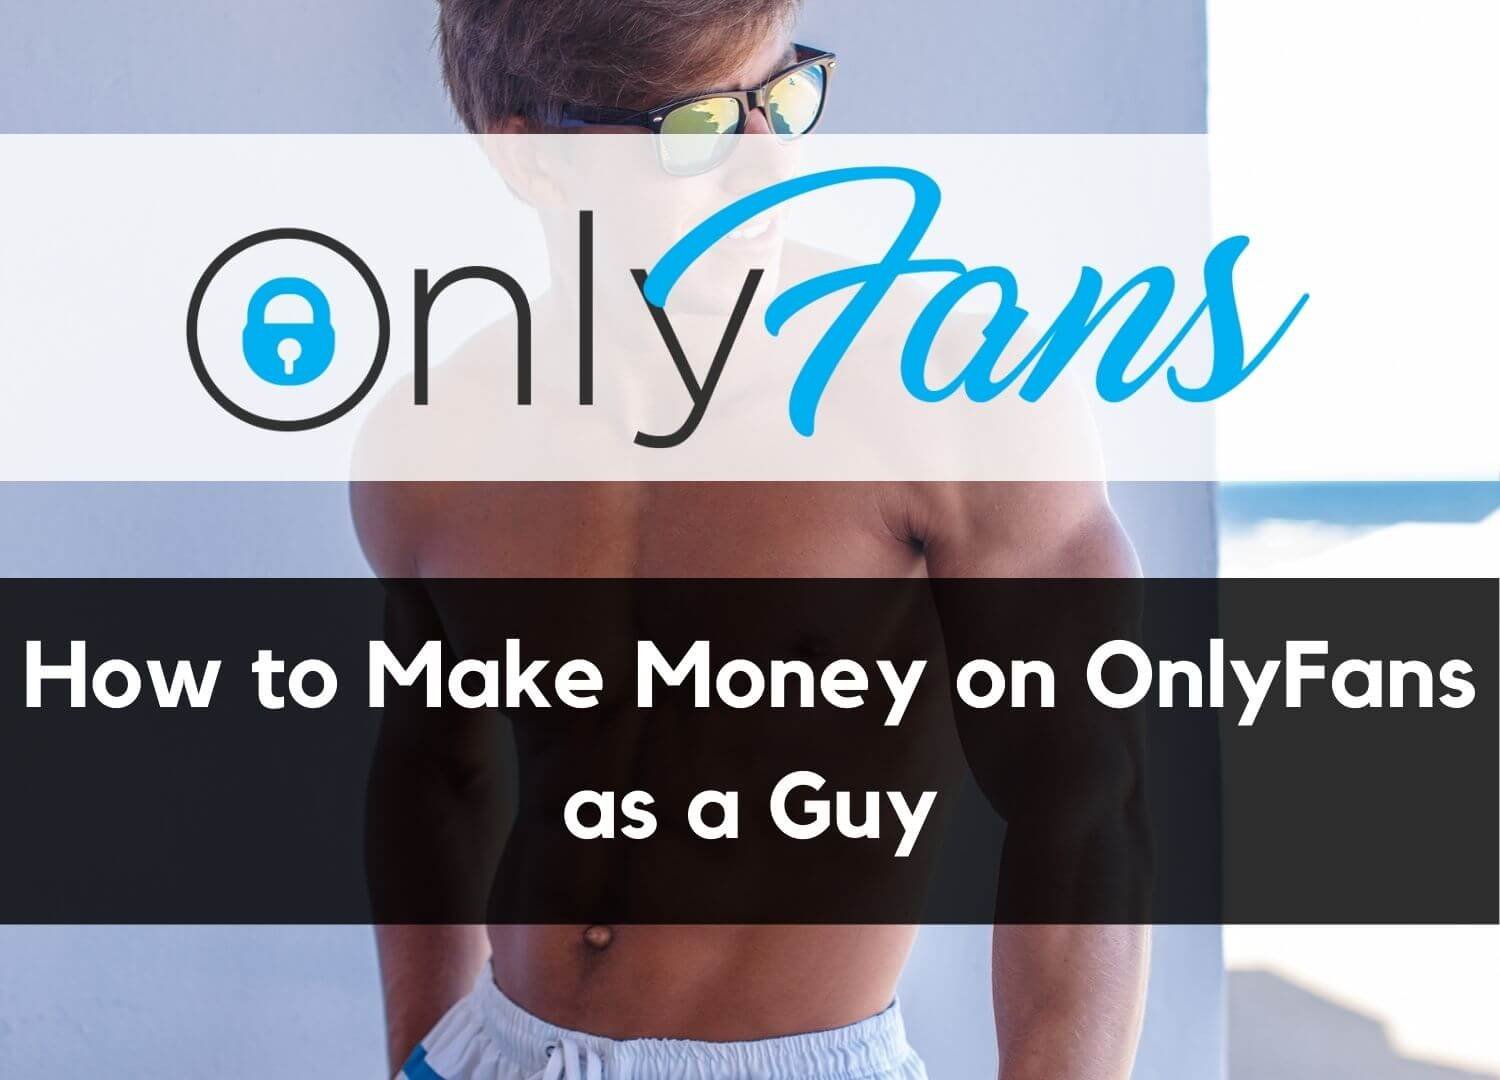 How much can a guy make on onlyfans